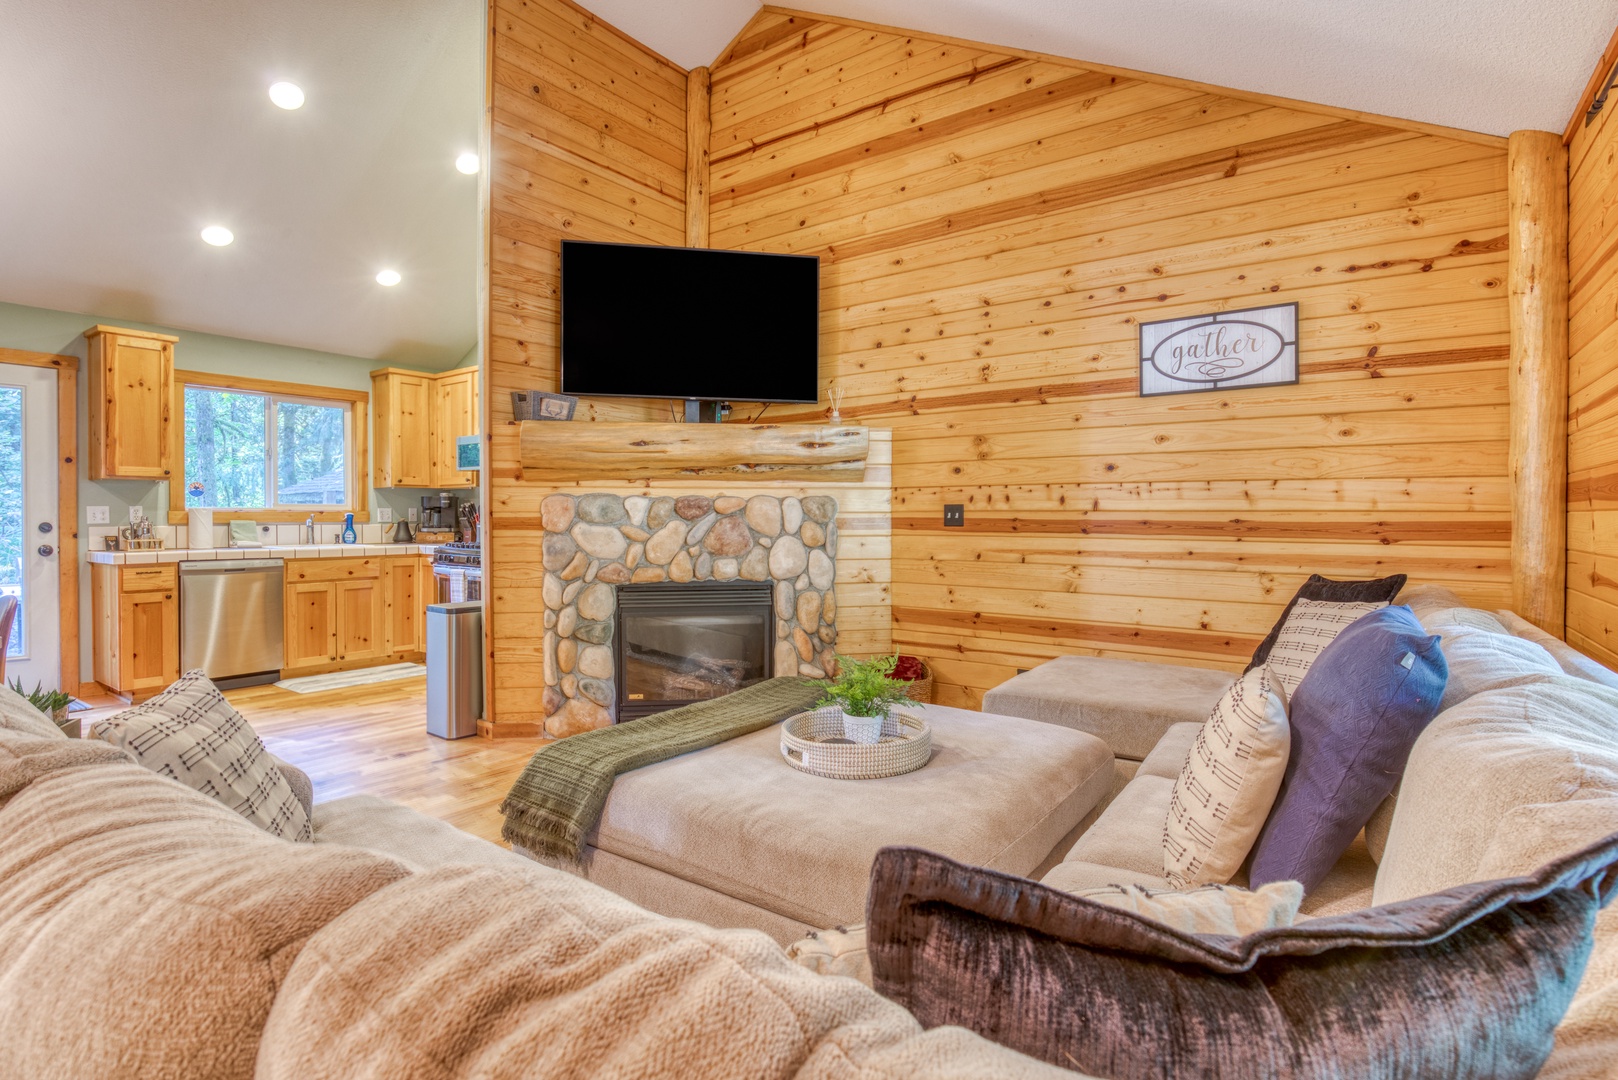 Brightwood Vacation Rentals, Riverside Retreat - Step inside and you'll find a cozy living area with a flatscreen TV and fireplace